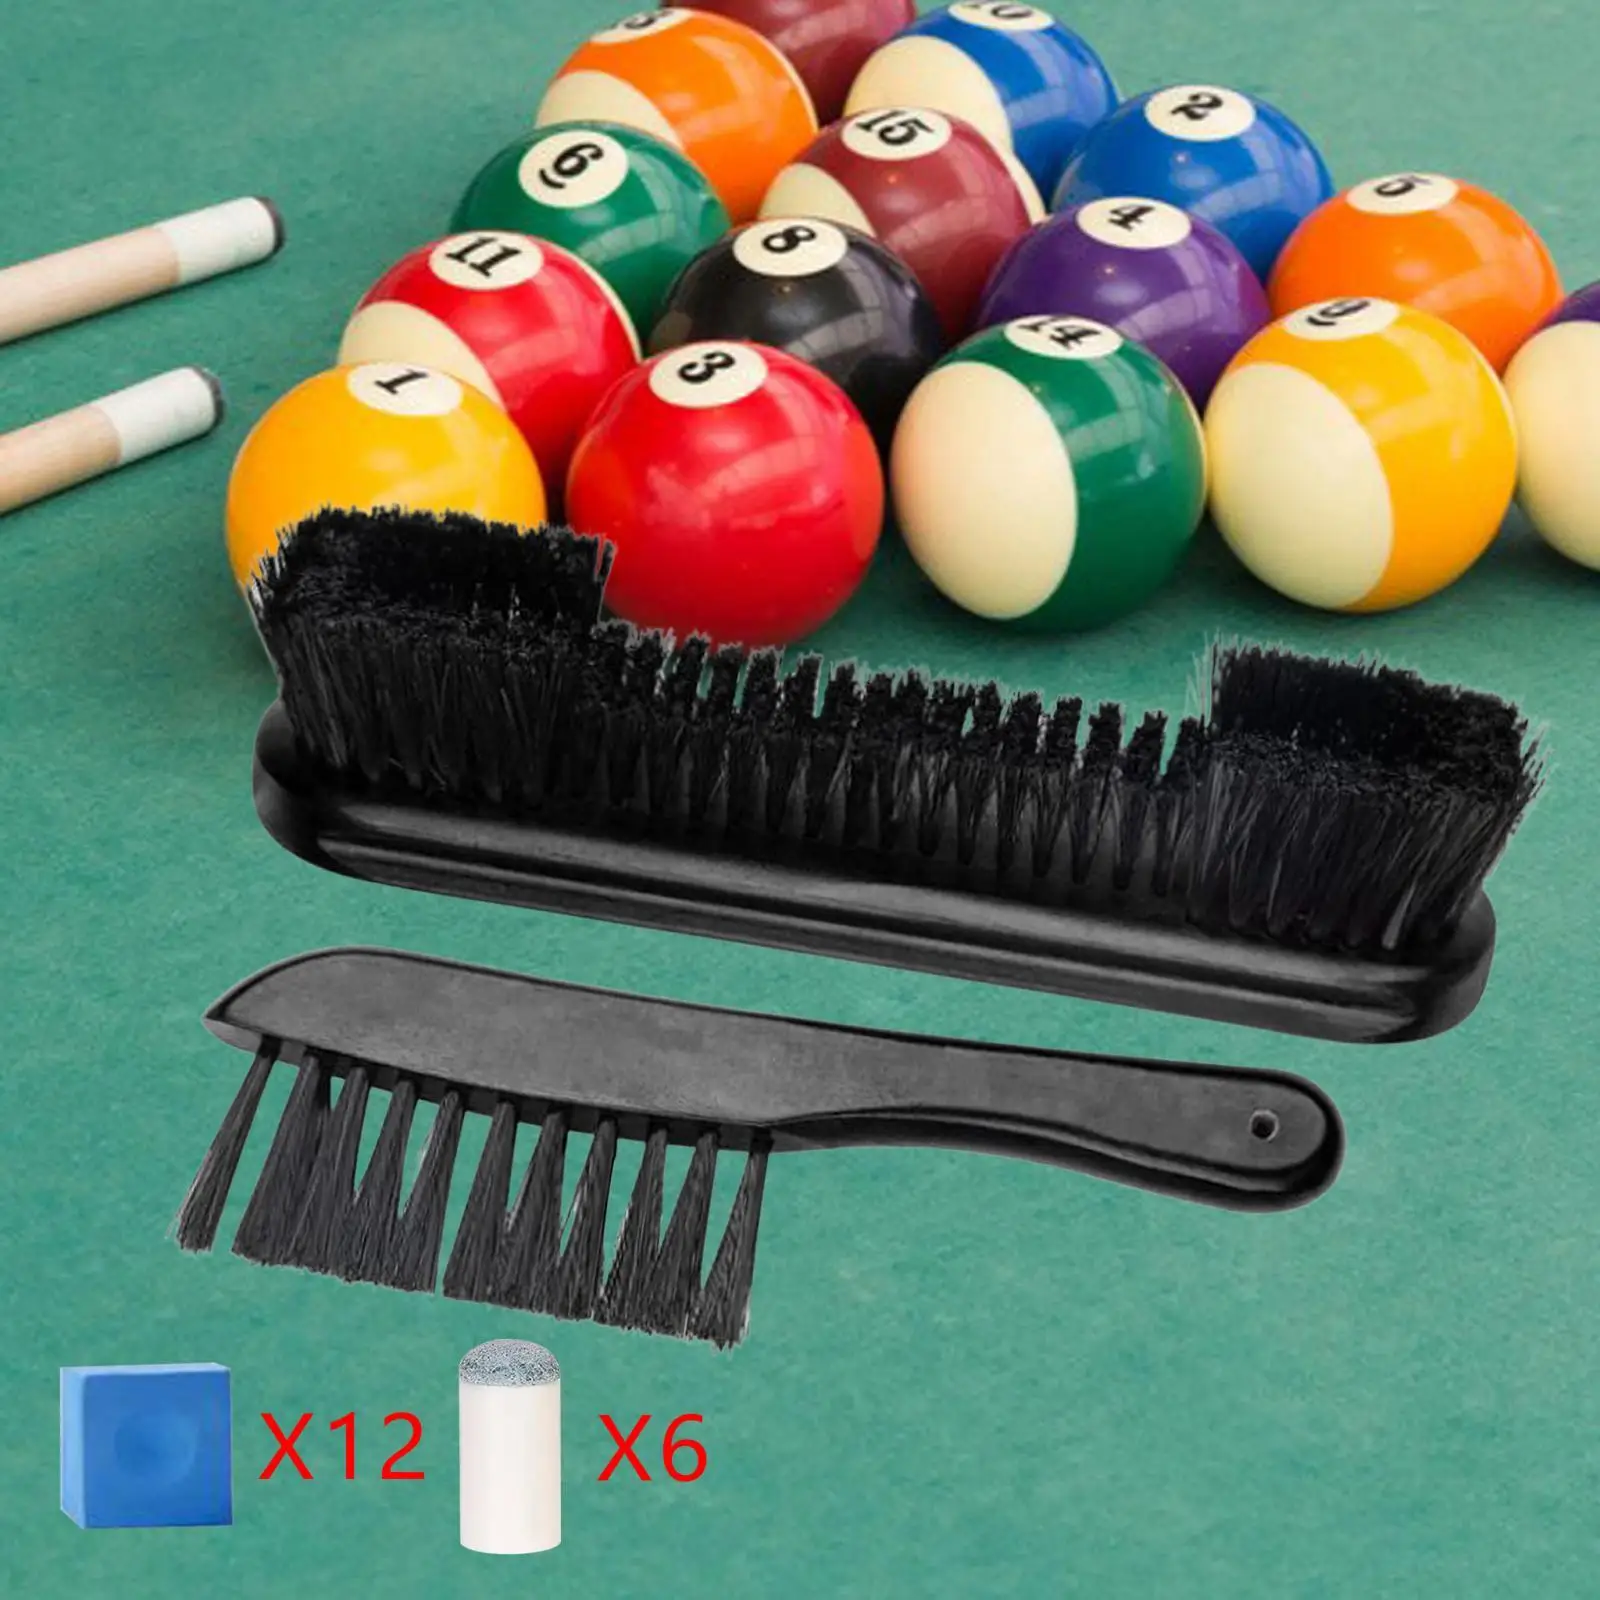 Billiard Pool Table Brush Brush Set Convenient Durable Cue Tips Replacements Pool Snooker Accessories Billiards Brush